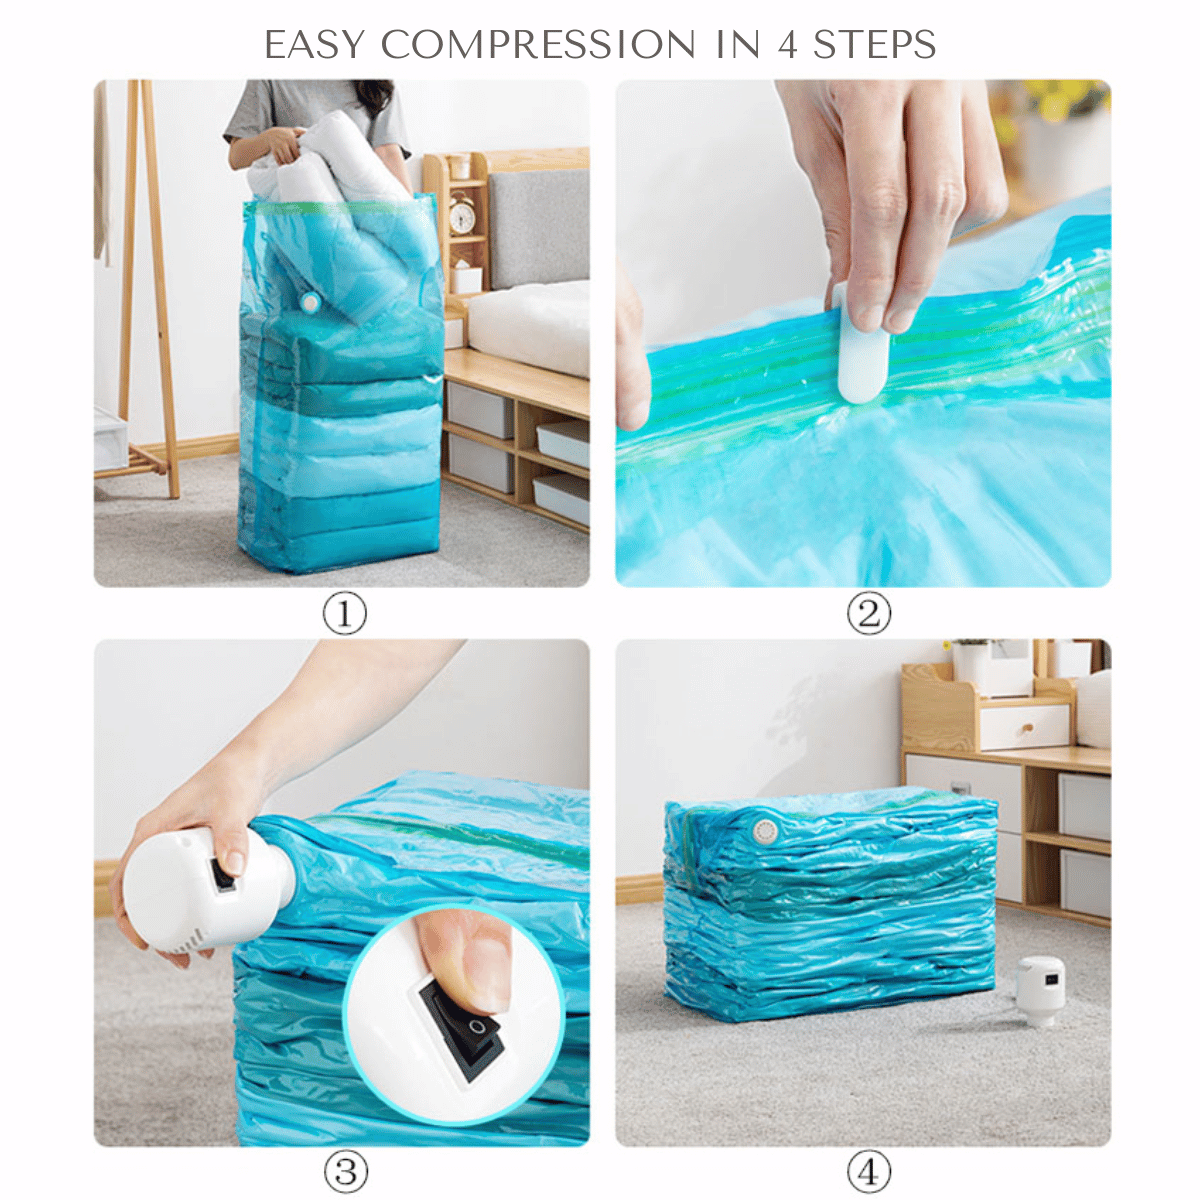 4pcs/set Vacuum Compression Storage Bags (1 Extra Large, 1 Medium, 1 Small,  1 Manual Pump), Space Saver Sealing Bags With Dual Zipper For Clothes,  Quilts, Travel Luggage, Bedding, Etc.